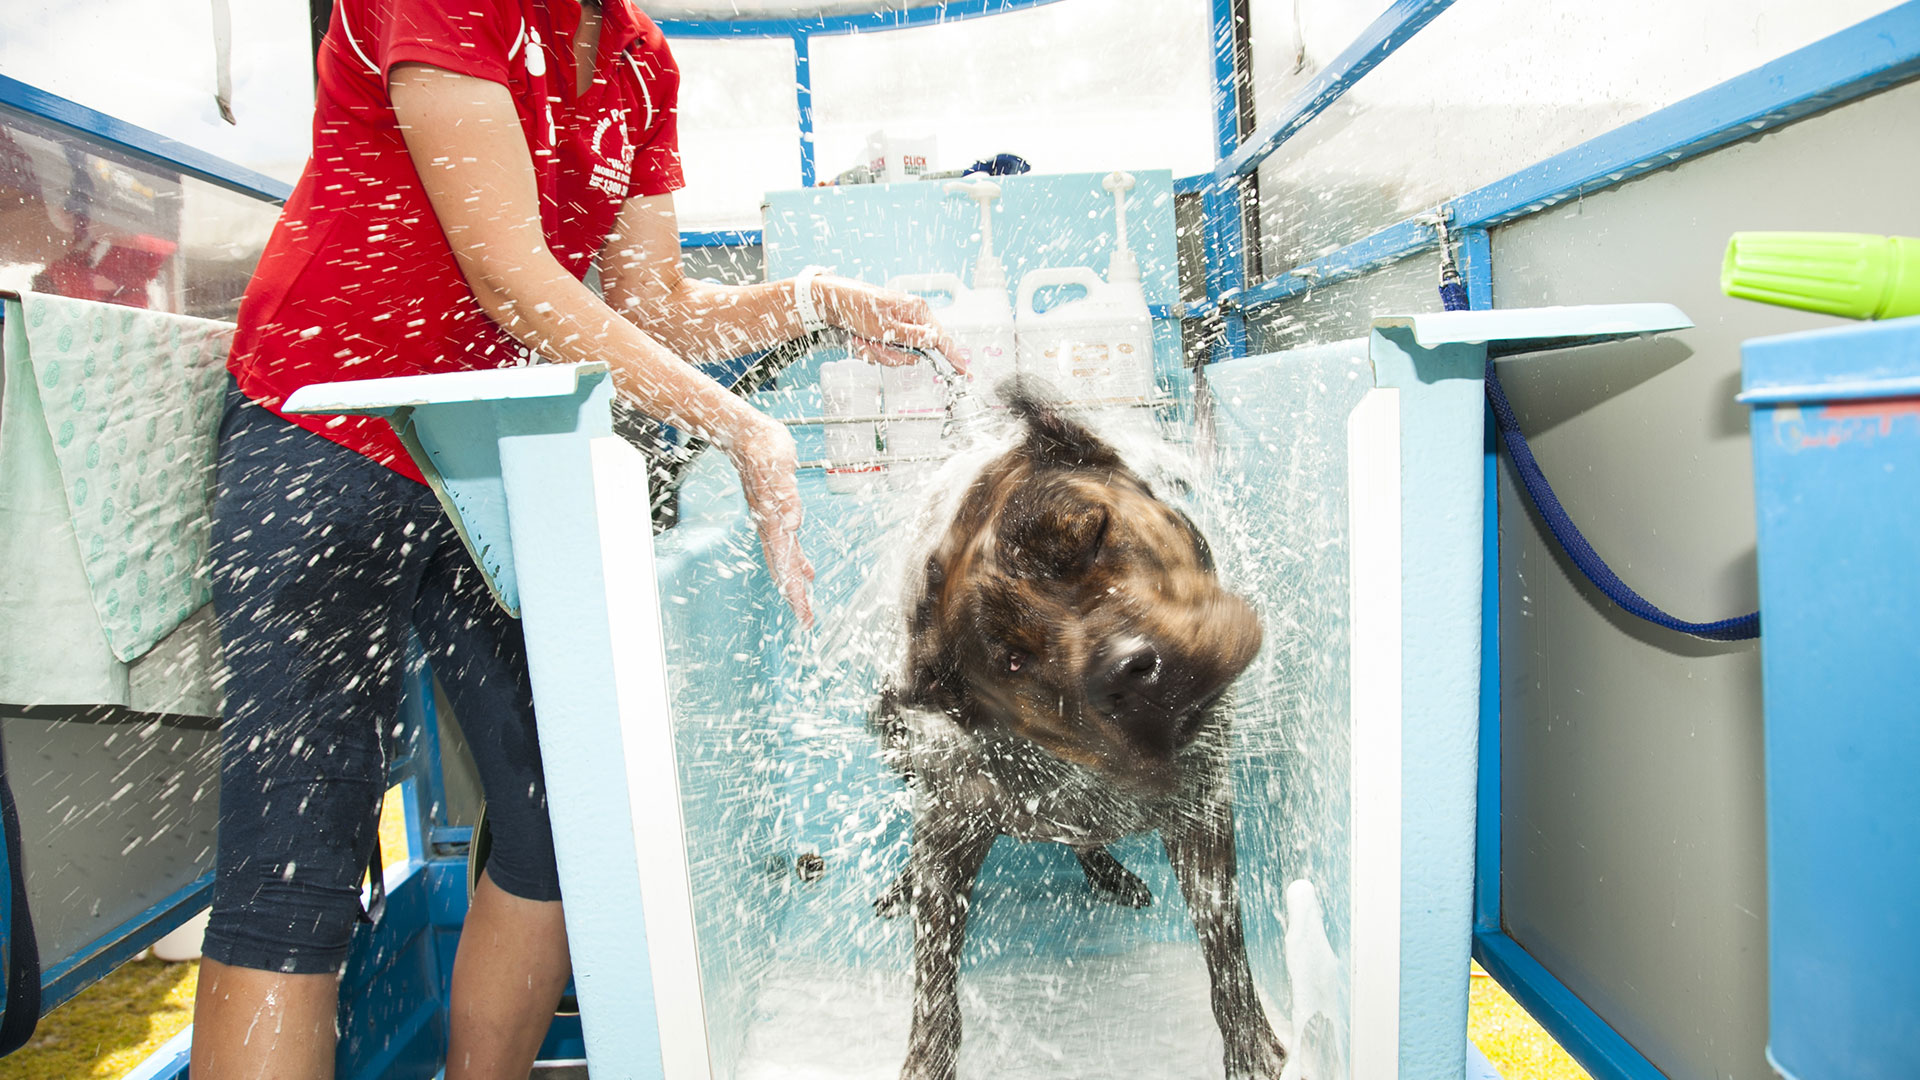 Panama City Dog getting a Bath at Dagny and Dexter's